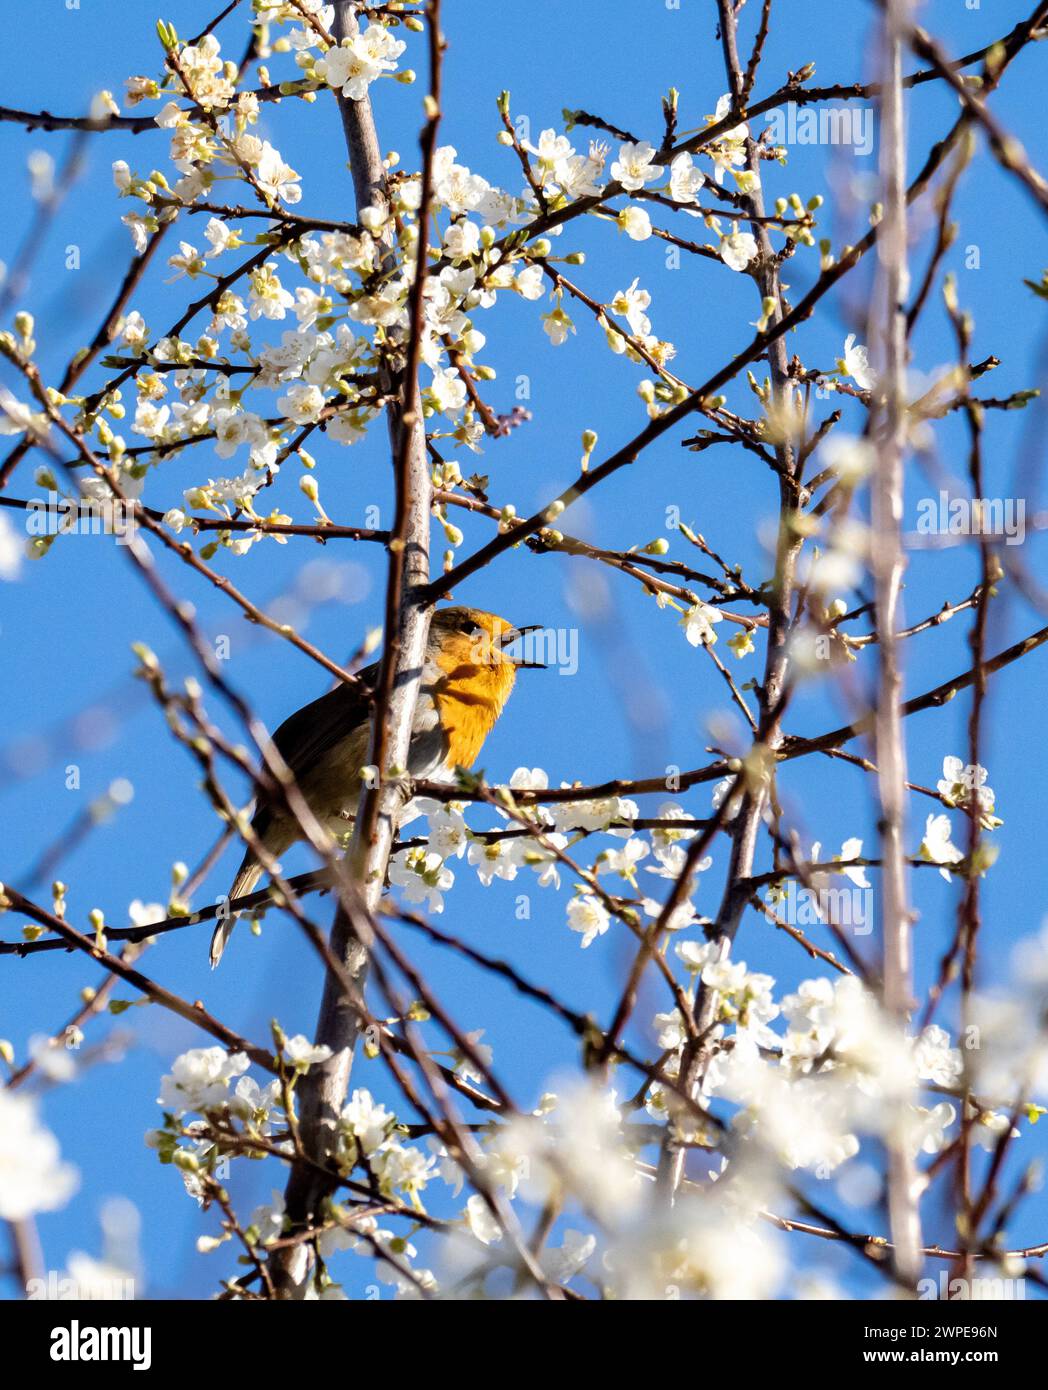 A Robin, Erithacus rubecula in a tree with blossom in Ambleside, Lake District, UK. Stock Photo